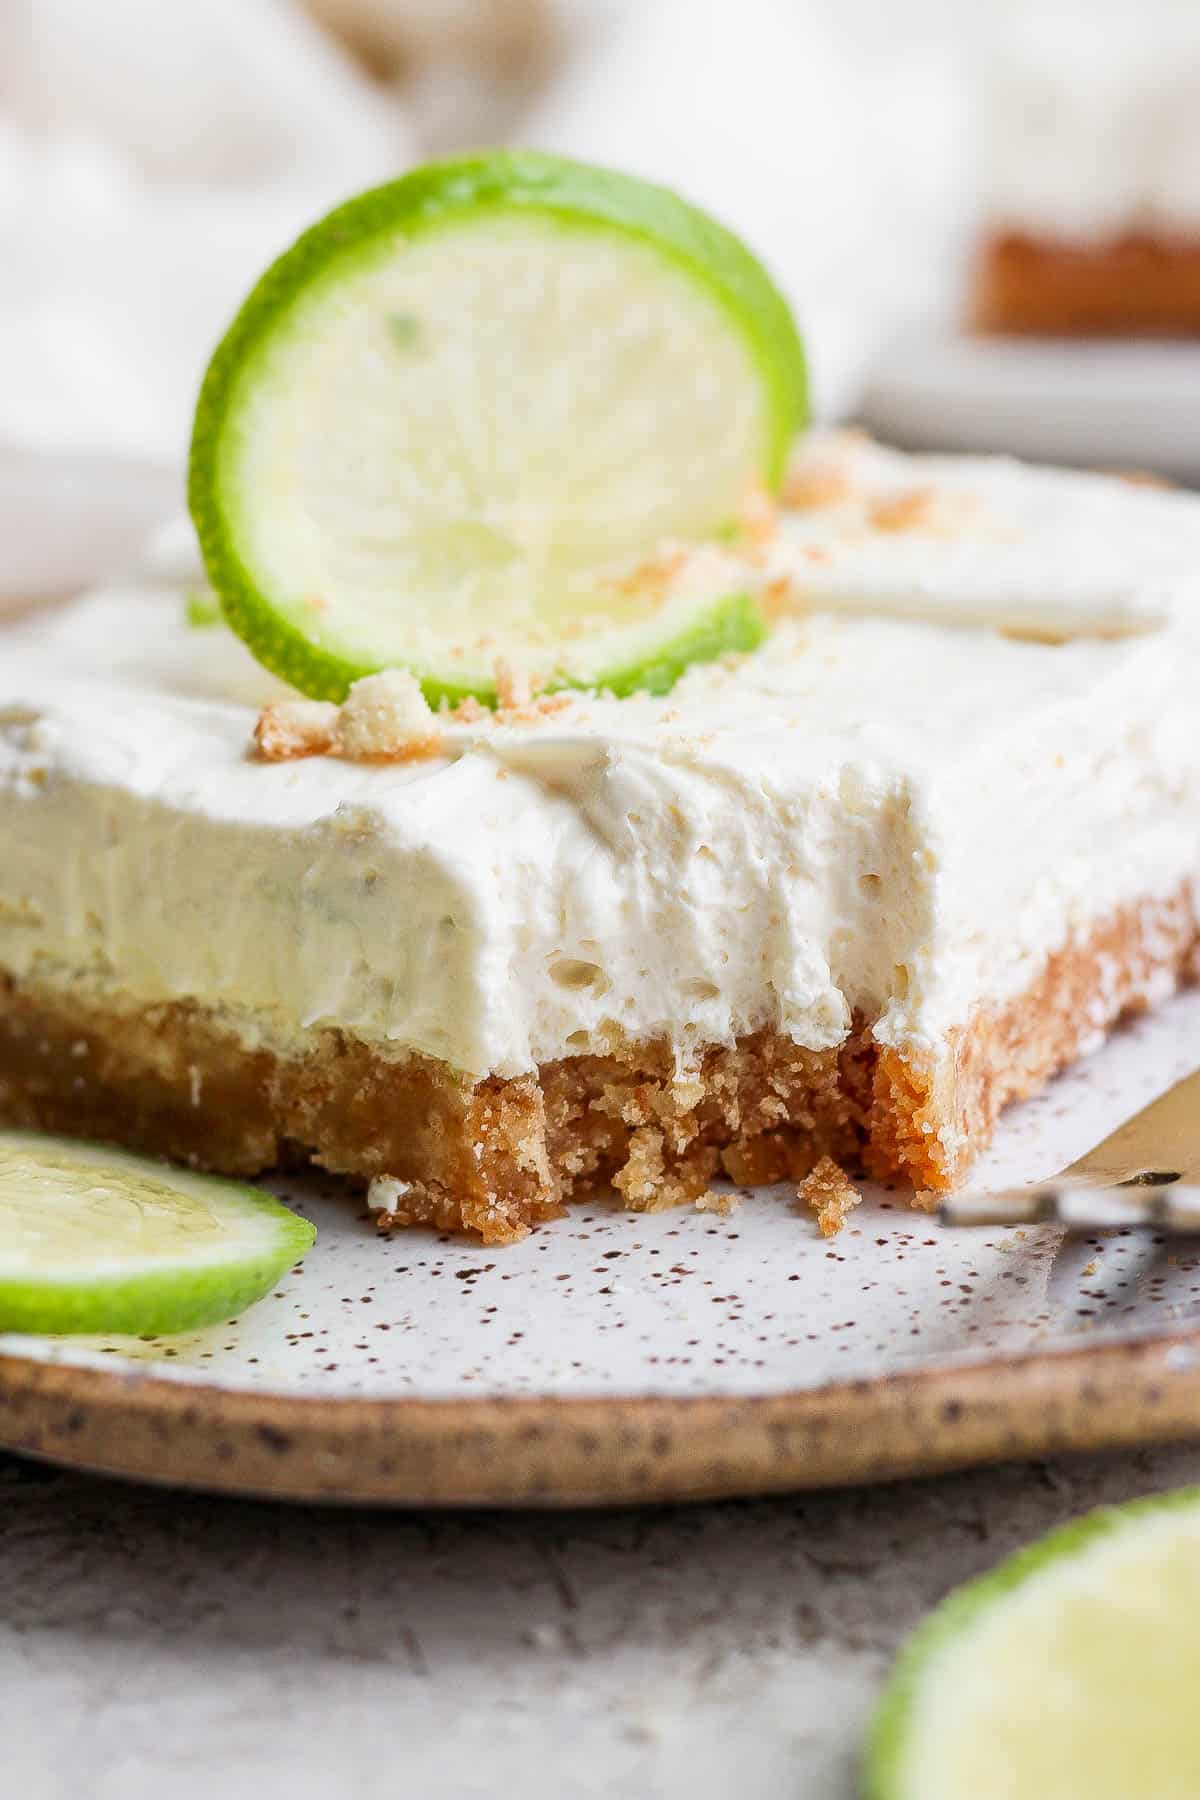 A square of the key lime cheese cake topped with a slice of lime on a plate.